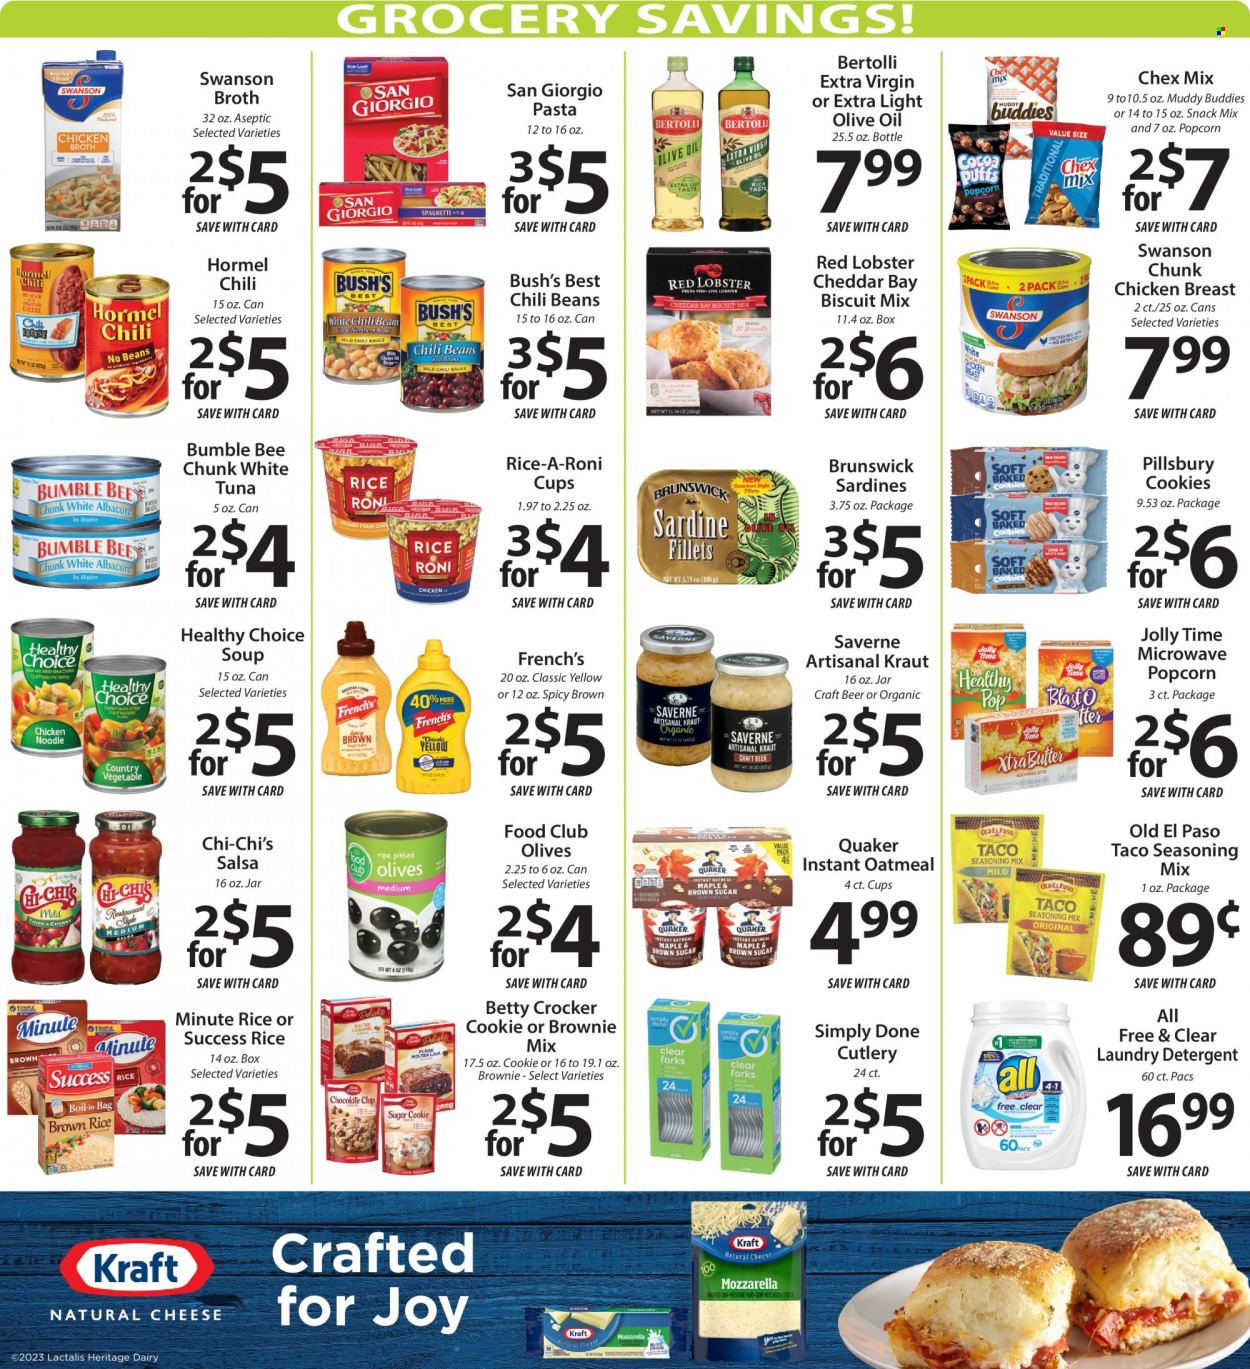 thumbnail - ACME Fresh Market Flyer - 02/02/2023 - 02/08/2023 - Sales products - Old El Paso, brownie mix, beans, lobster, sardines, tuna, soup, pasta, Bumble Bee, Pillsbury, Quaker, Healthy Choice, Bertolli, Hormel, cheddar, cheese, cookies, snack, biscuit, popcorn, Chex Mix, oatmeal, broth, olives, chili beans, spice, salsa, extra virgin olive oil, olive oil, oil, beer, chicken breasts, detergent, laundry detergent, Joy. Page 6.